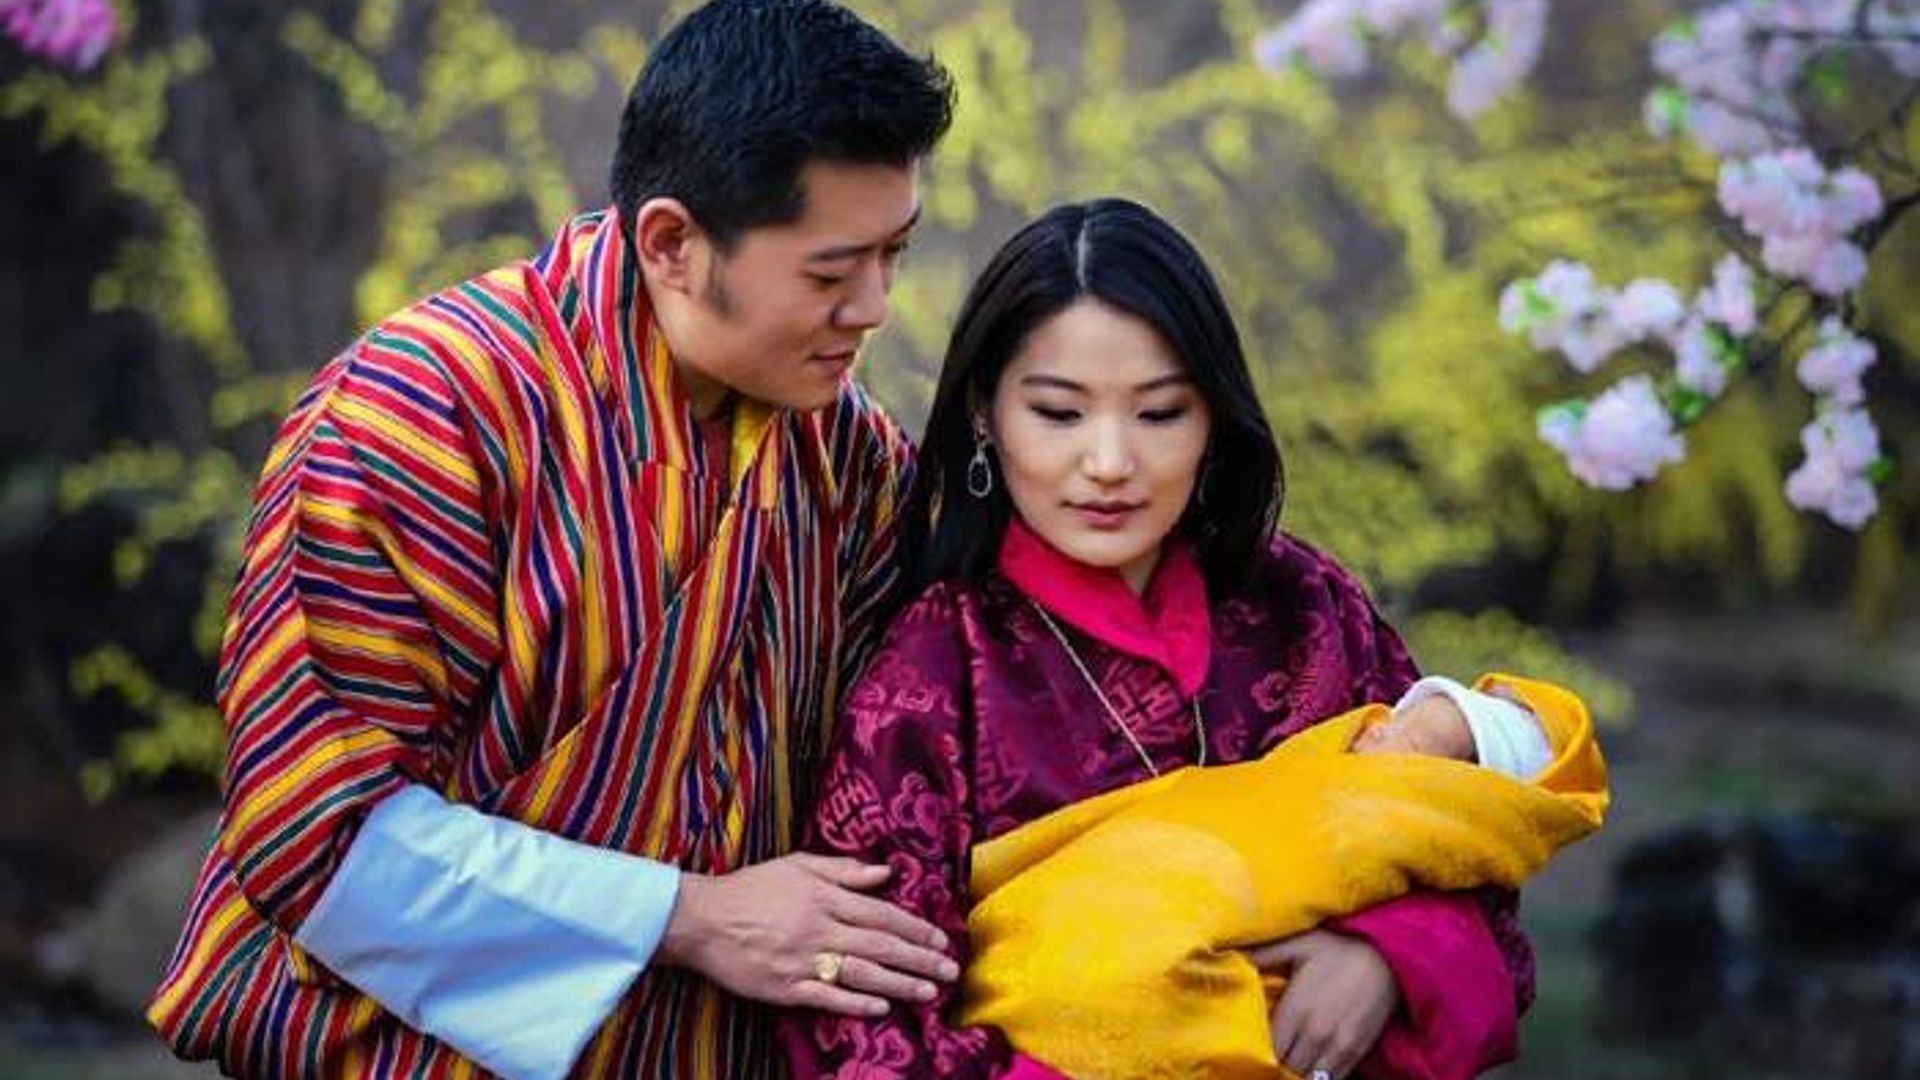 The King and Queen of Bhutan share first solo portraits of their little prince